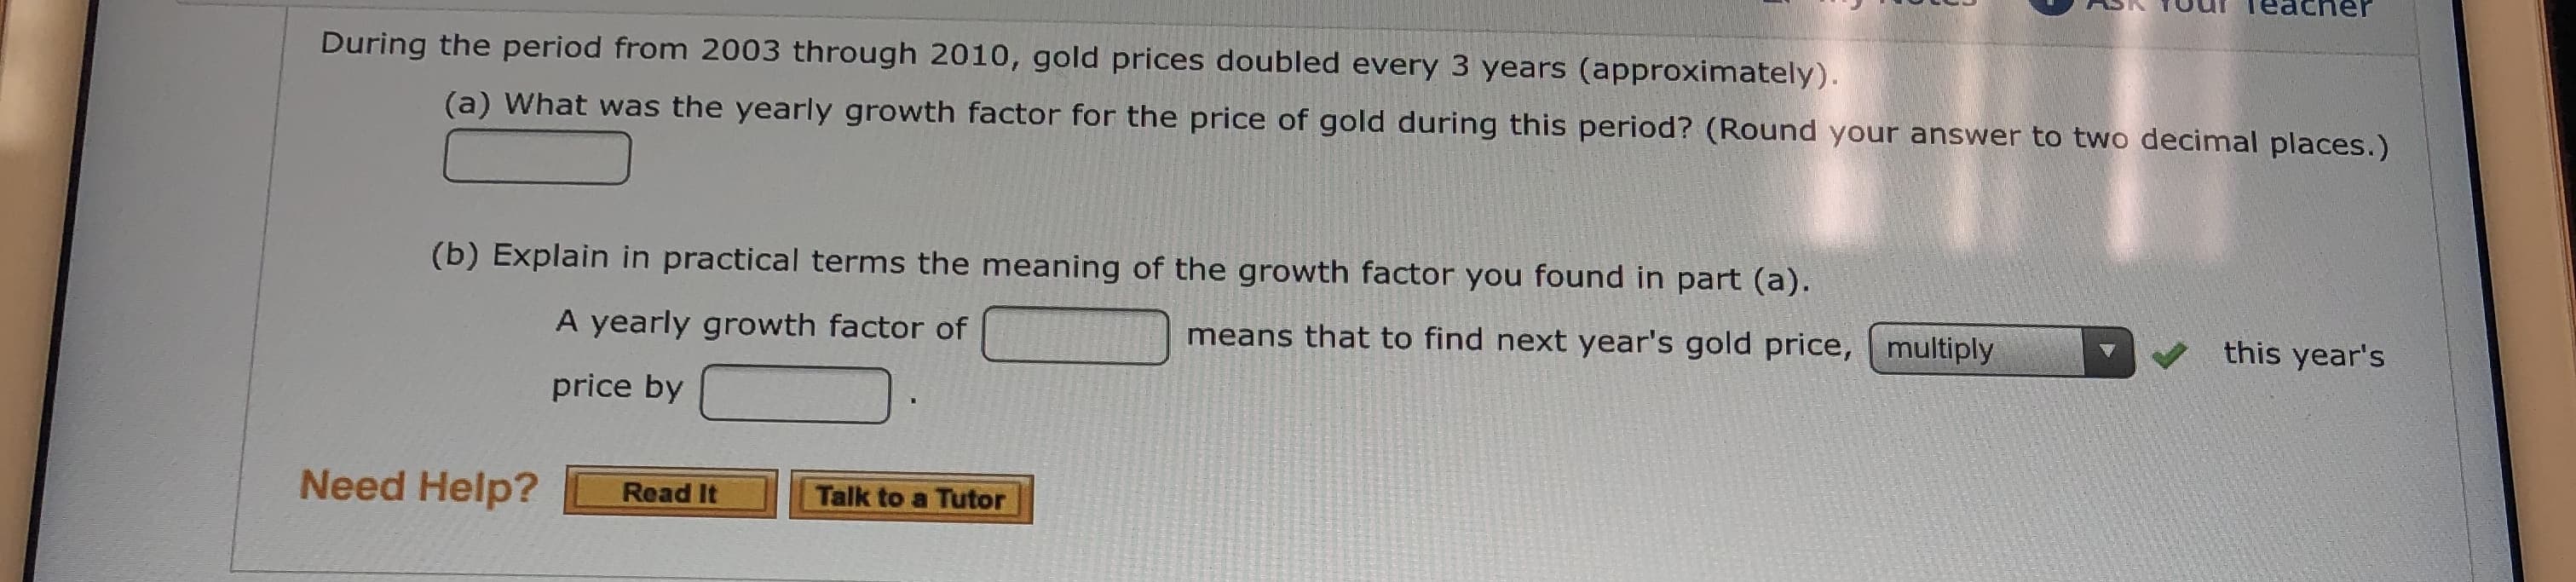 SS TOu Teacner
During the period from 2003 through 2010, gold prices doubled every 3 years (approximately).
(a) What was the yearly growth factor for the price of gold during this period? (Round your answer to two decimal places.)
(b) Explain in practical terms the meaning of the growth factor you found in part (a).
this year's
means that to find next year's gold price, multiply
A yearly growth factor of
price by
Need Help?
Talk to a Tutor
Read It
